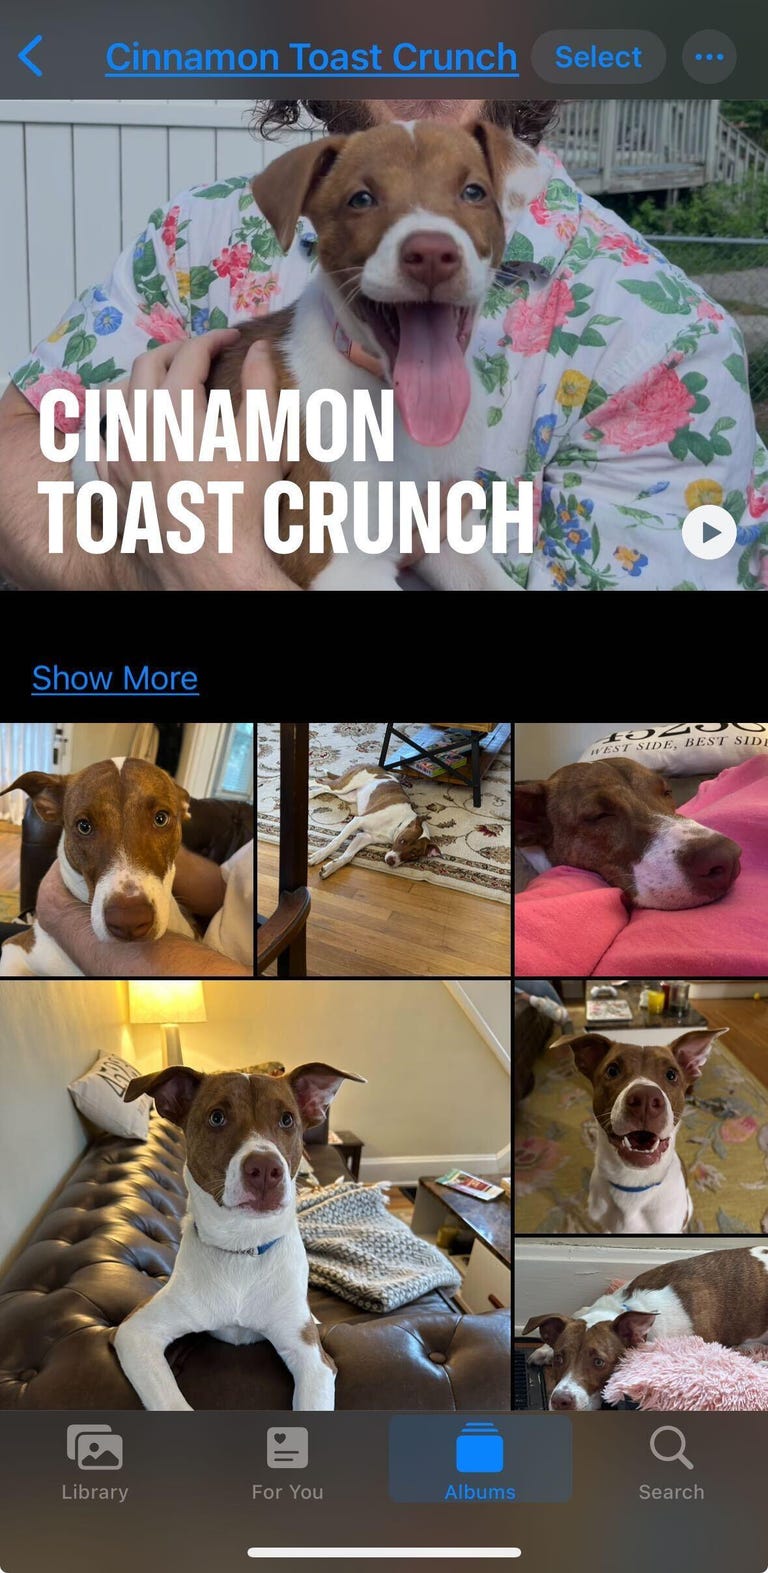 Various pictures of a brown and white dog